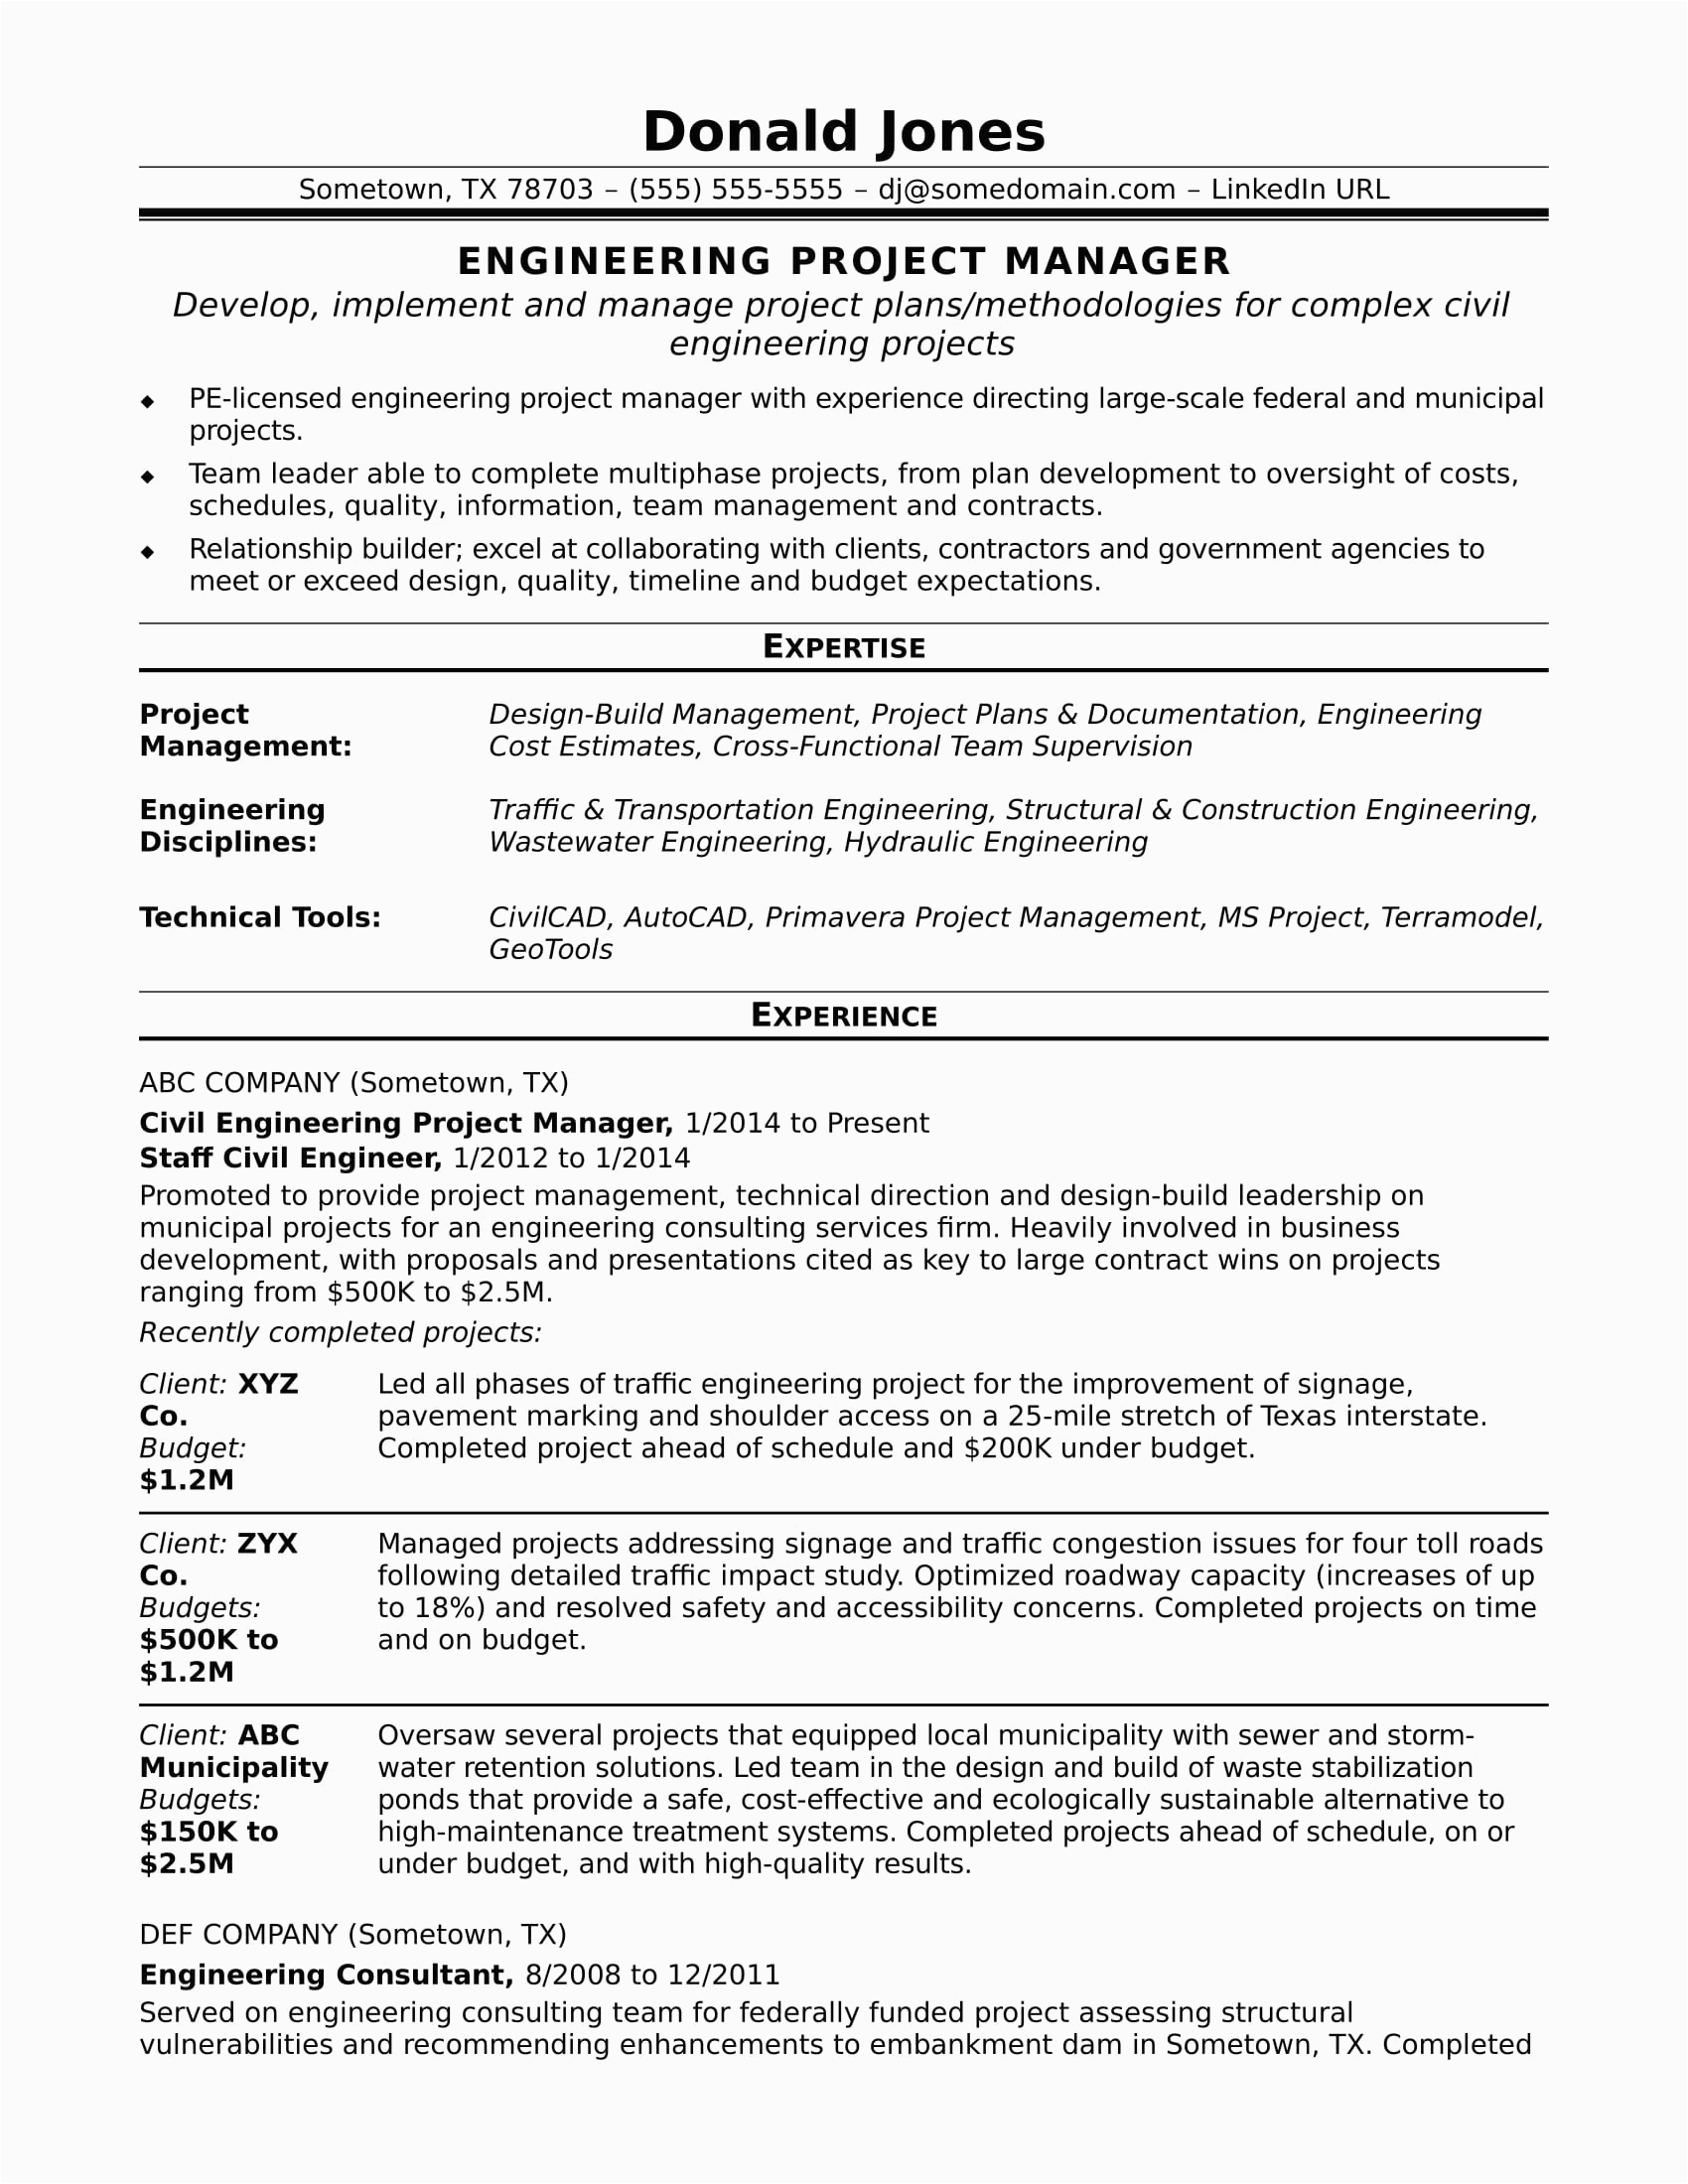 Sample Functional Resume for Project Manager Sample Resume for A Midlevel Engineering Project Manager